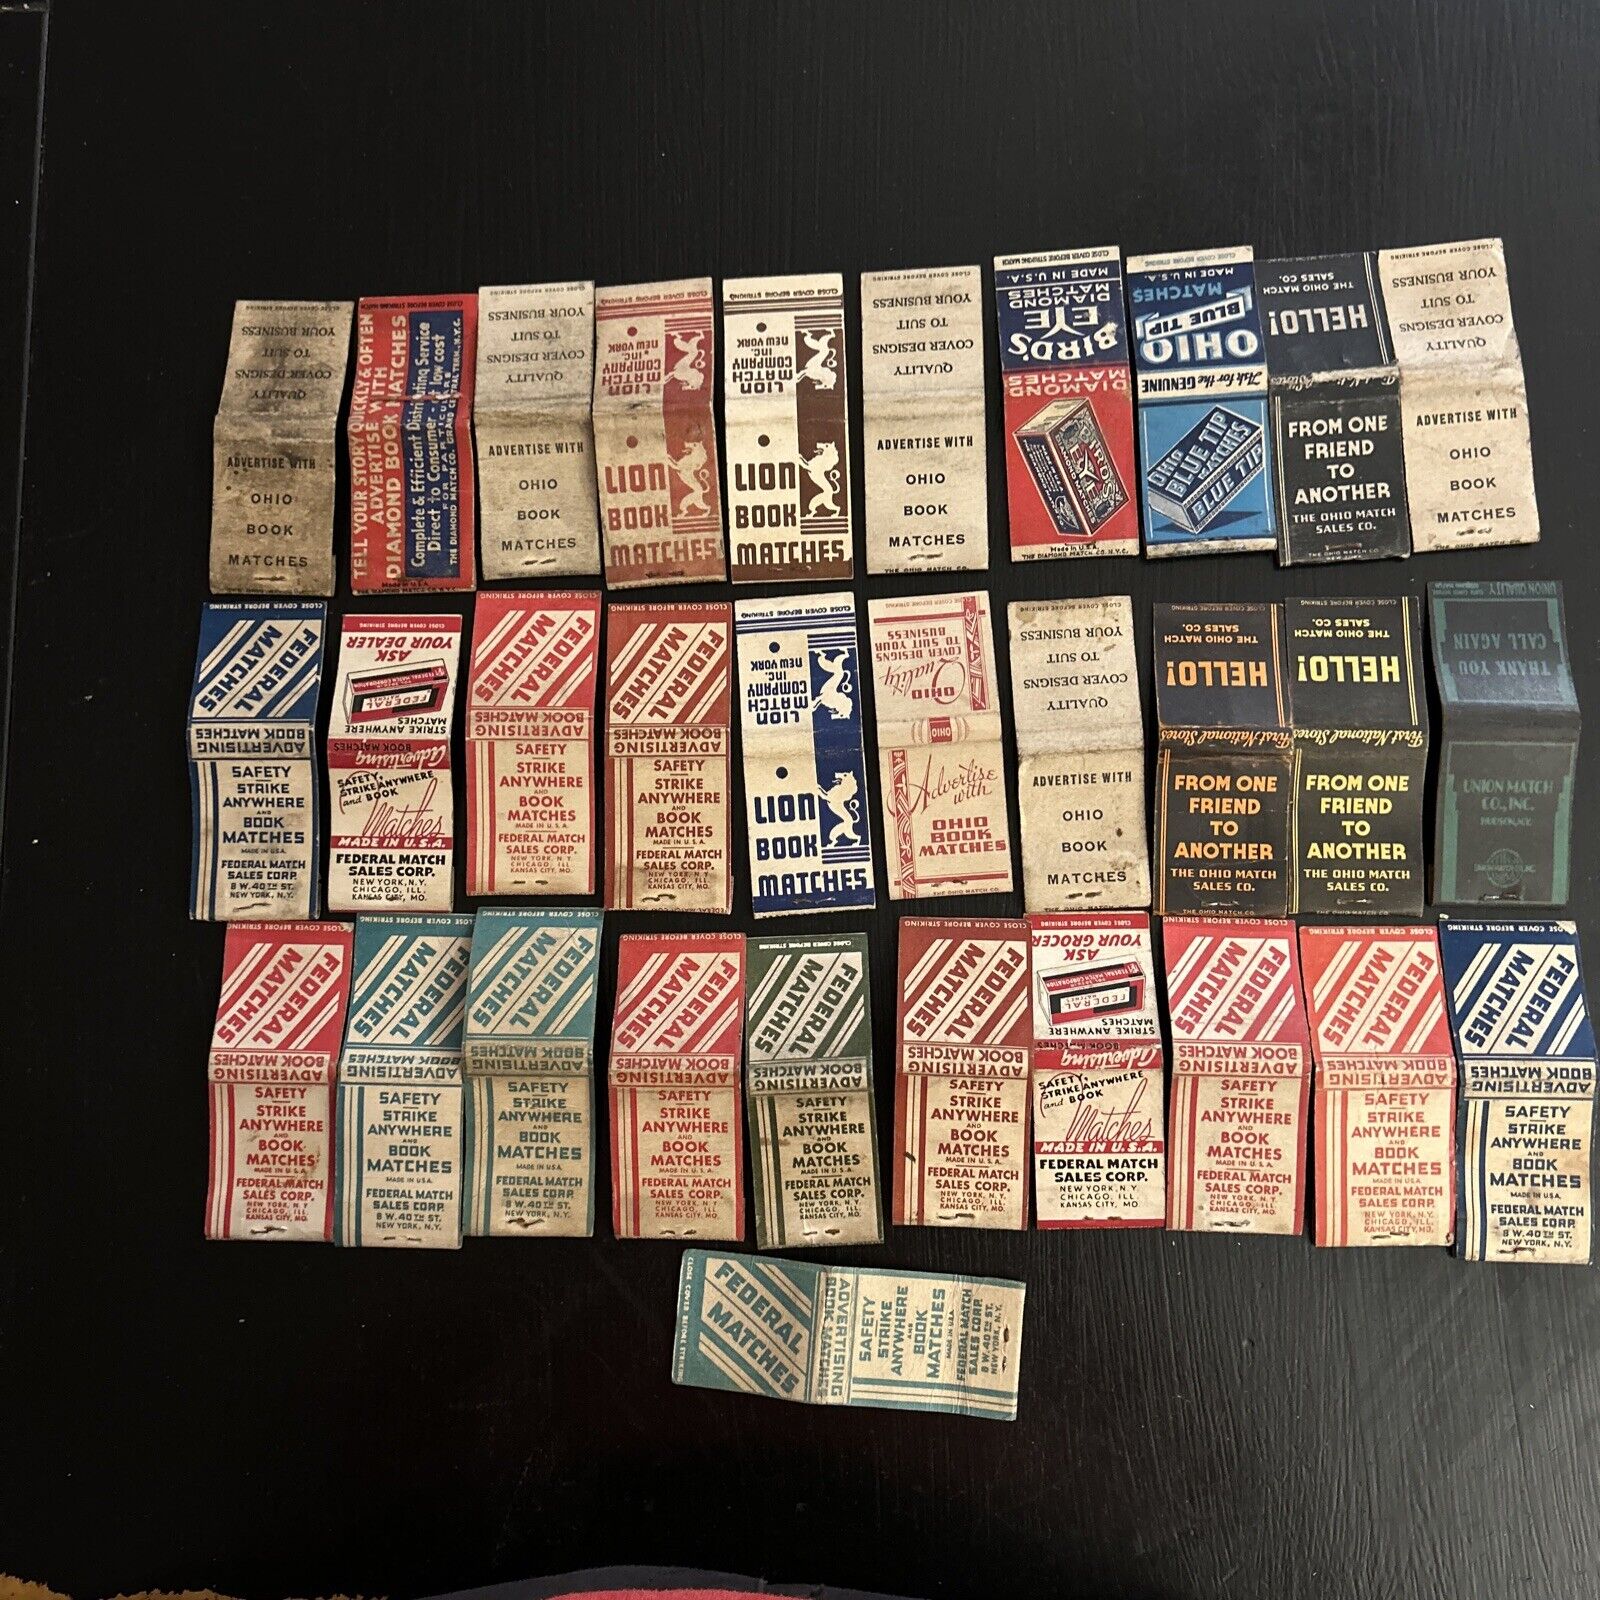 LOT OF 30+ VTG Empty Matchbook Covers 1930’s-1950’s Book Matches Companies